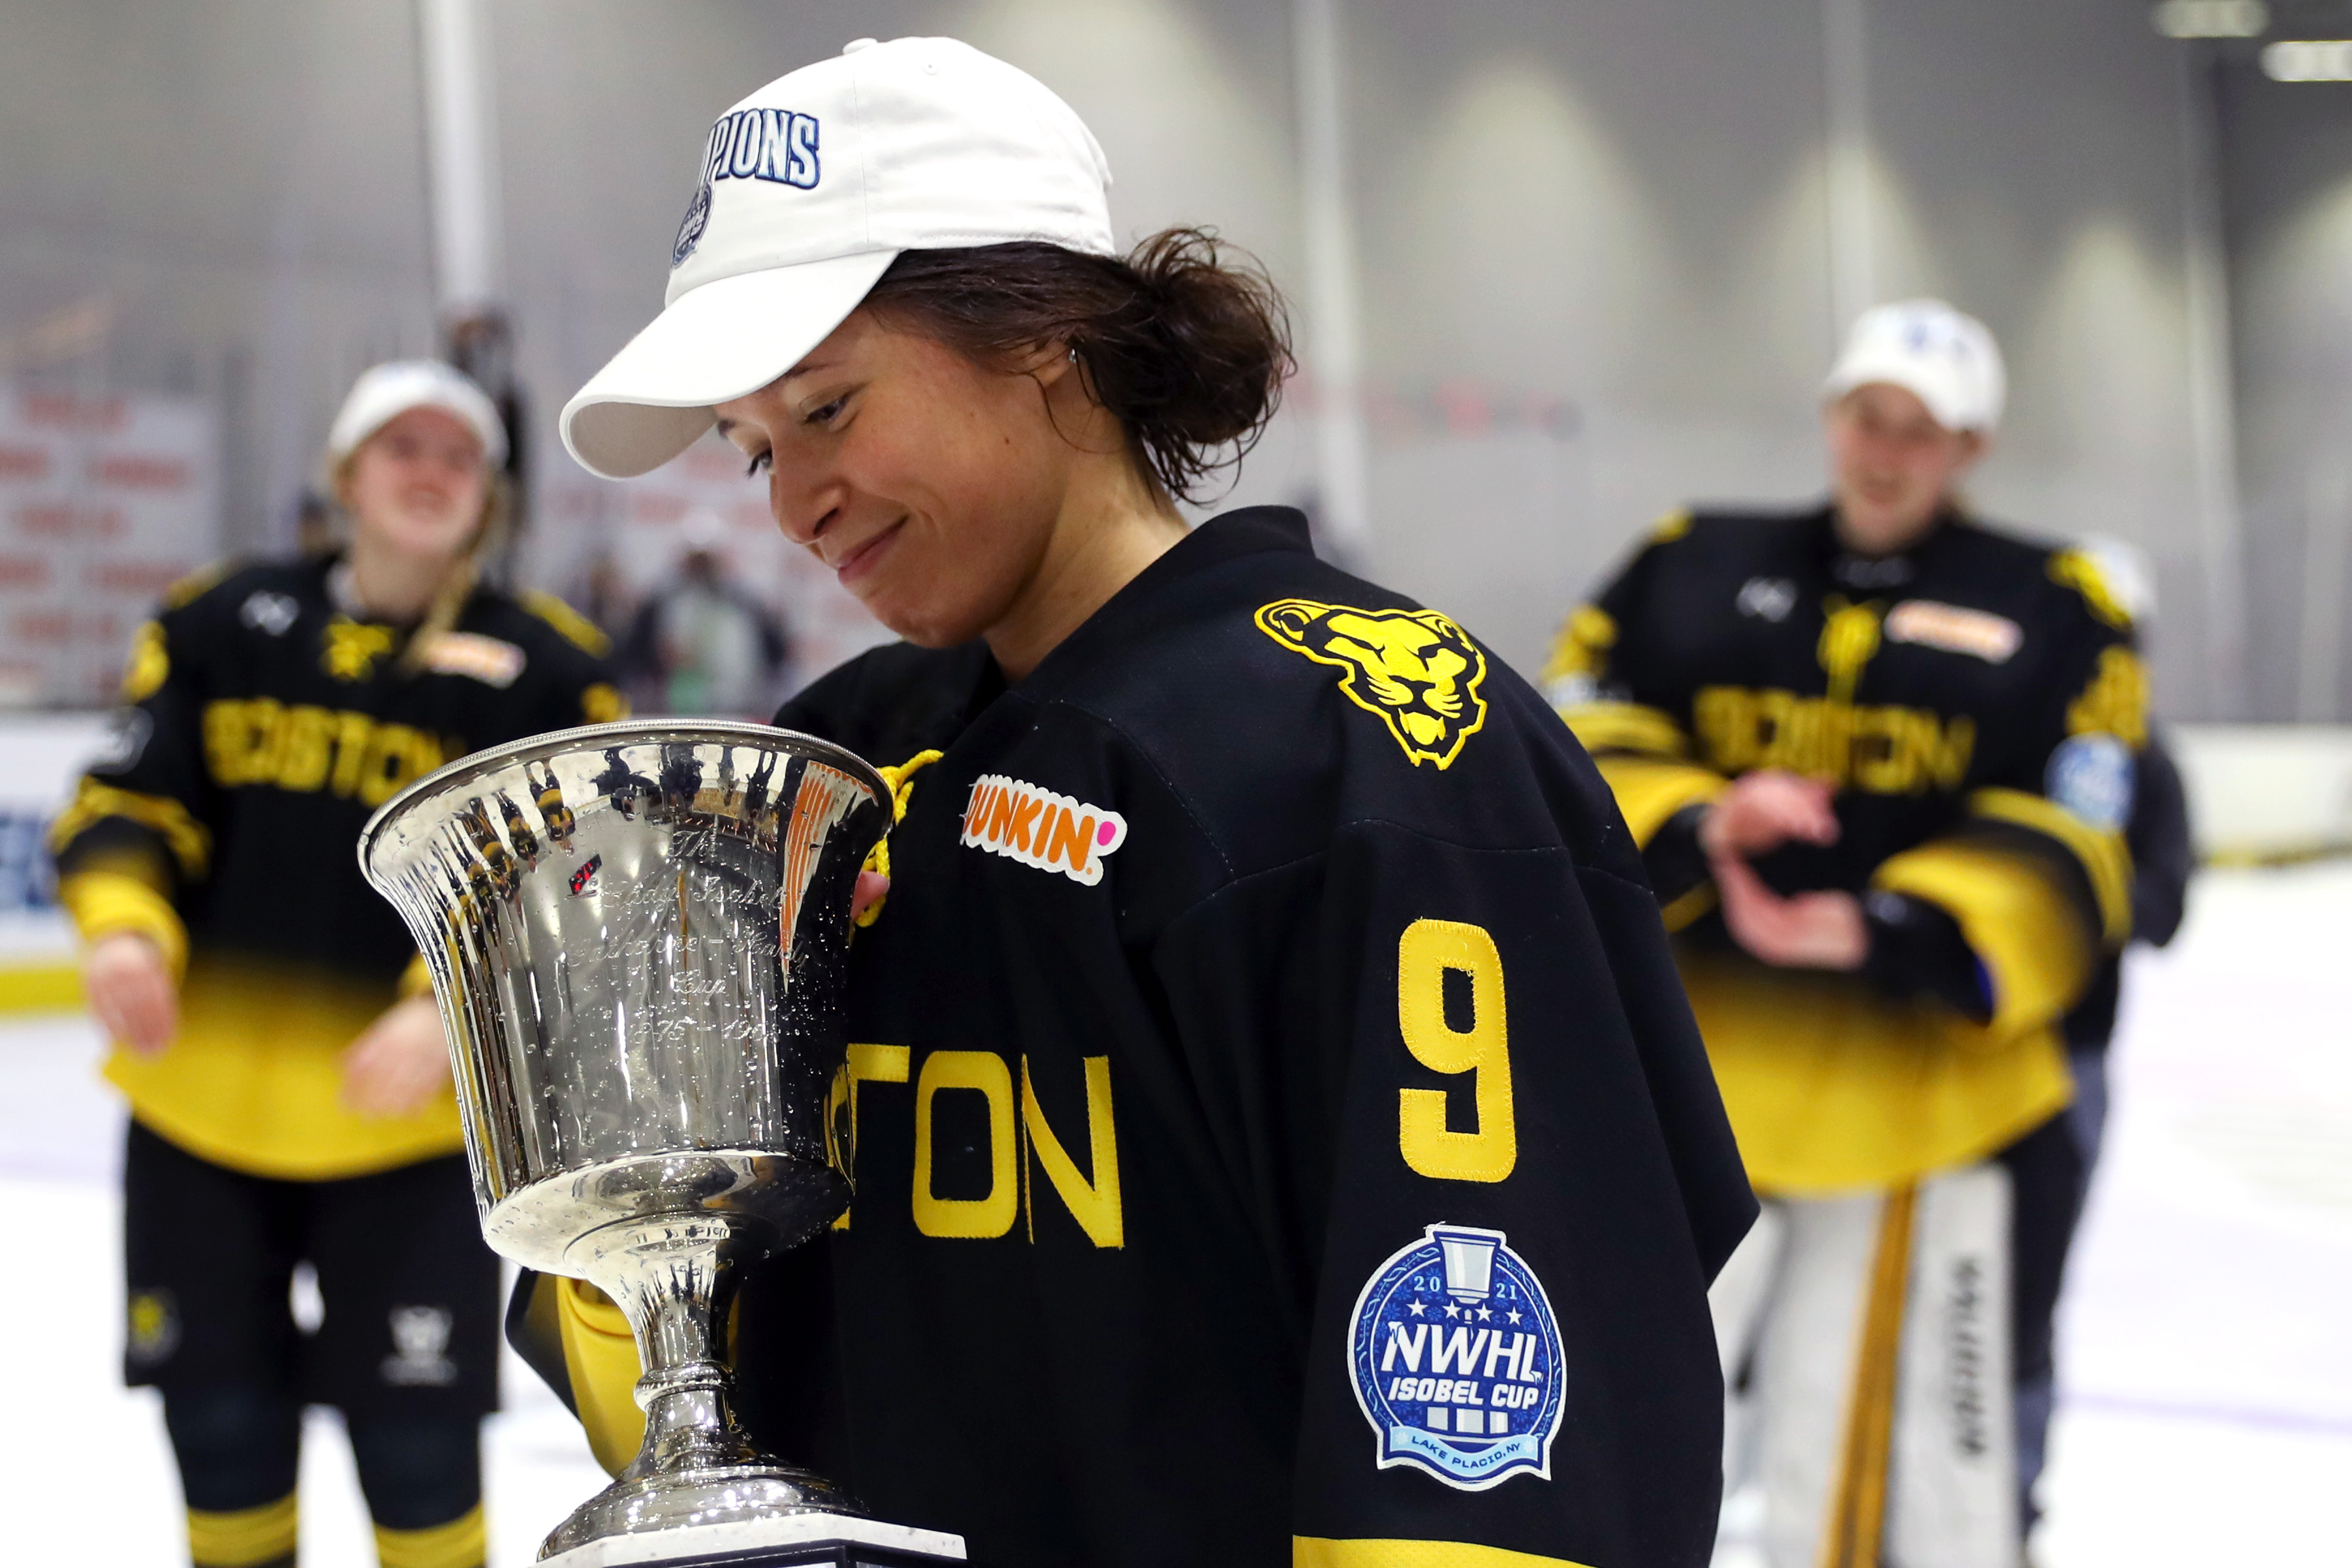 NWHL Isobel Cup Playoffs - Championship